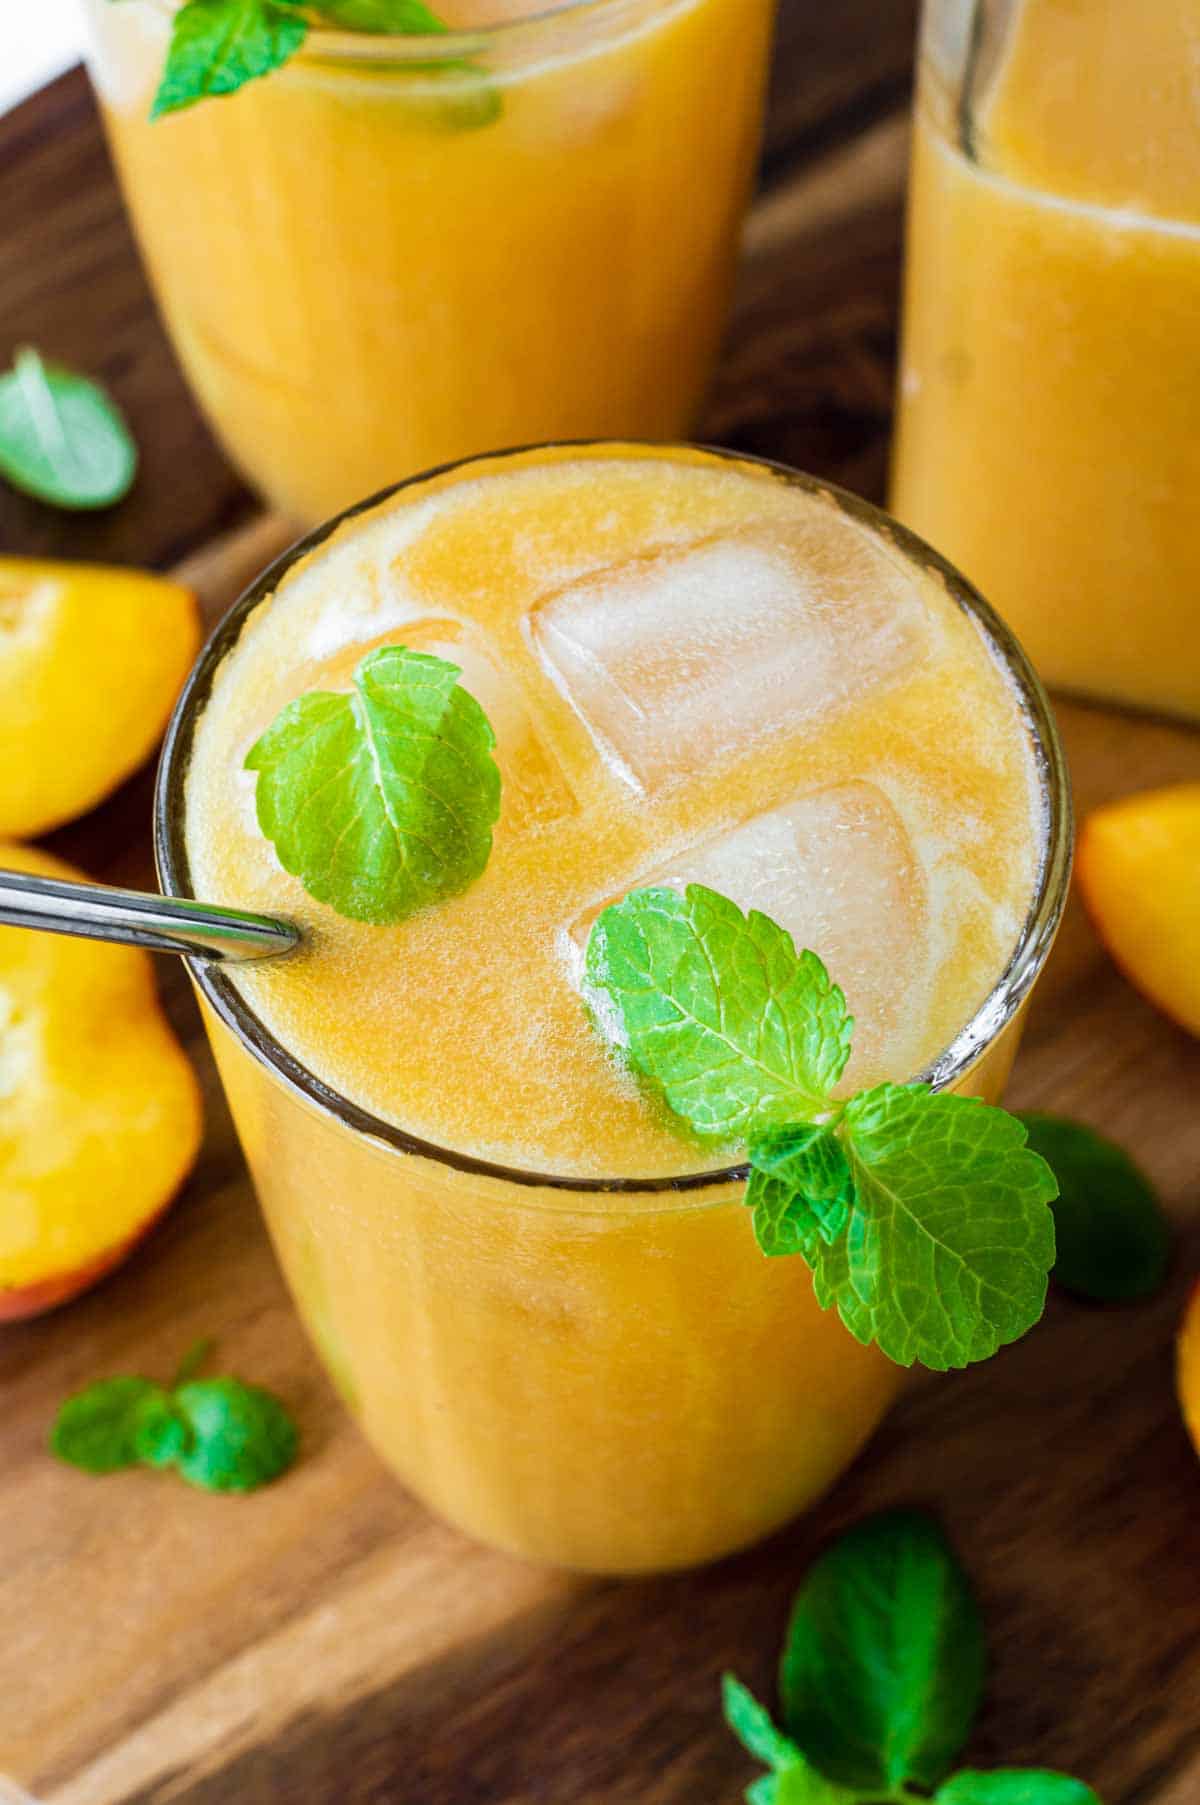 Peach juice served in a glass and topped with ice cubes and fresh mint.